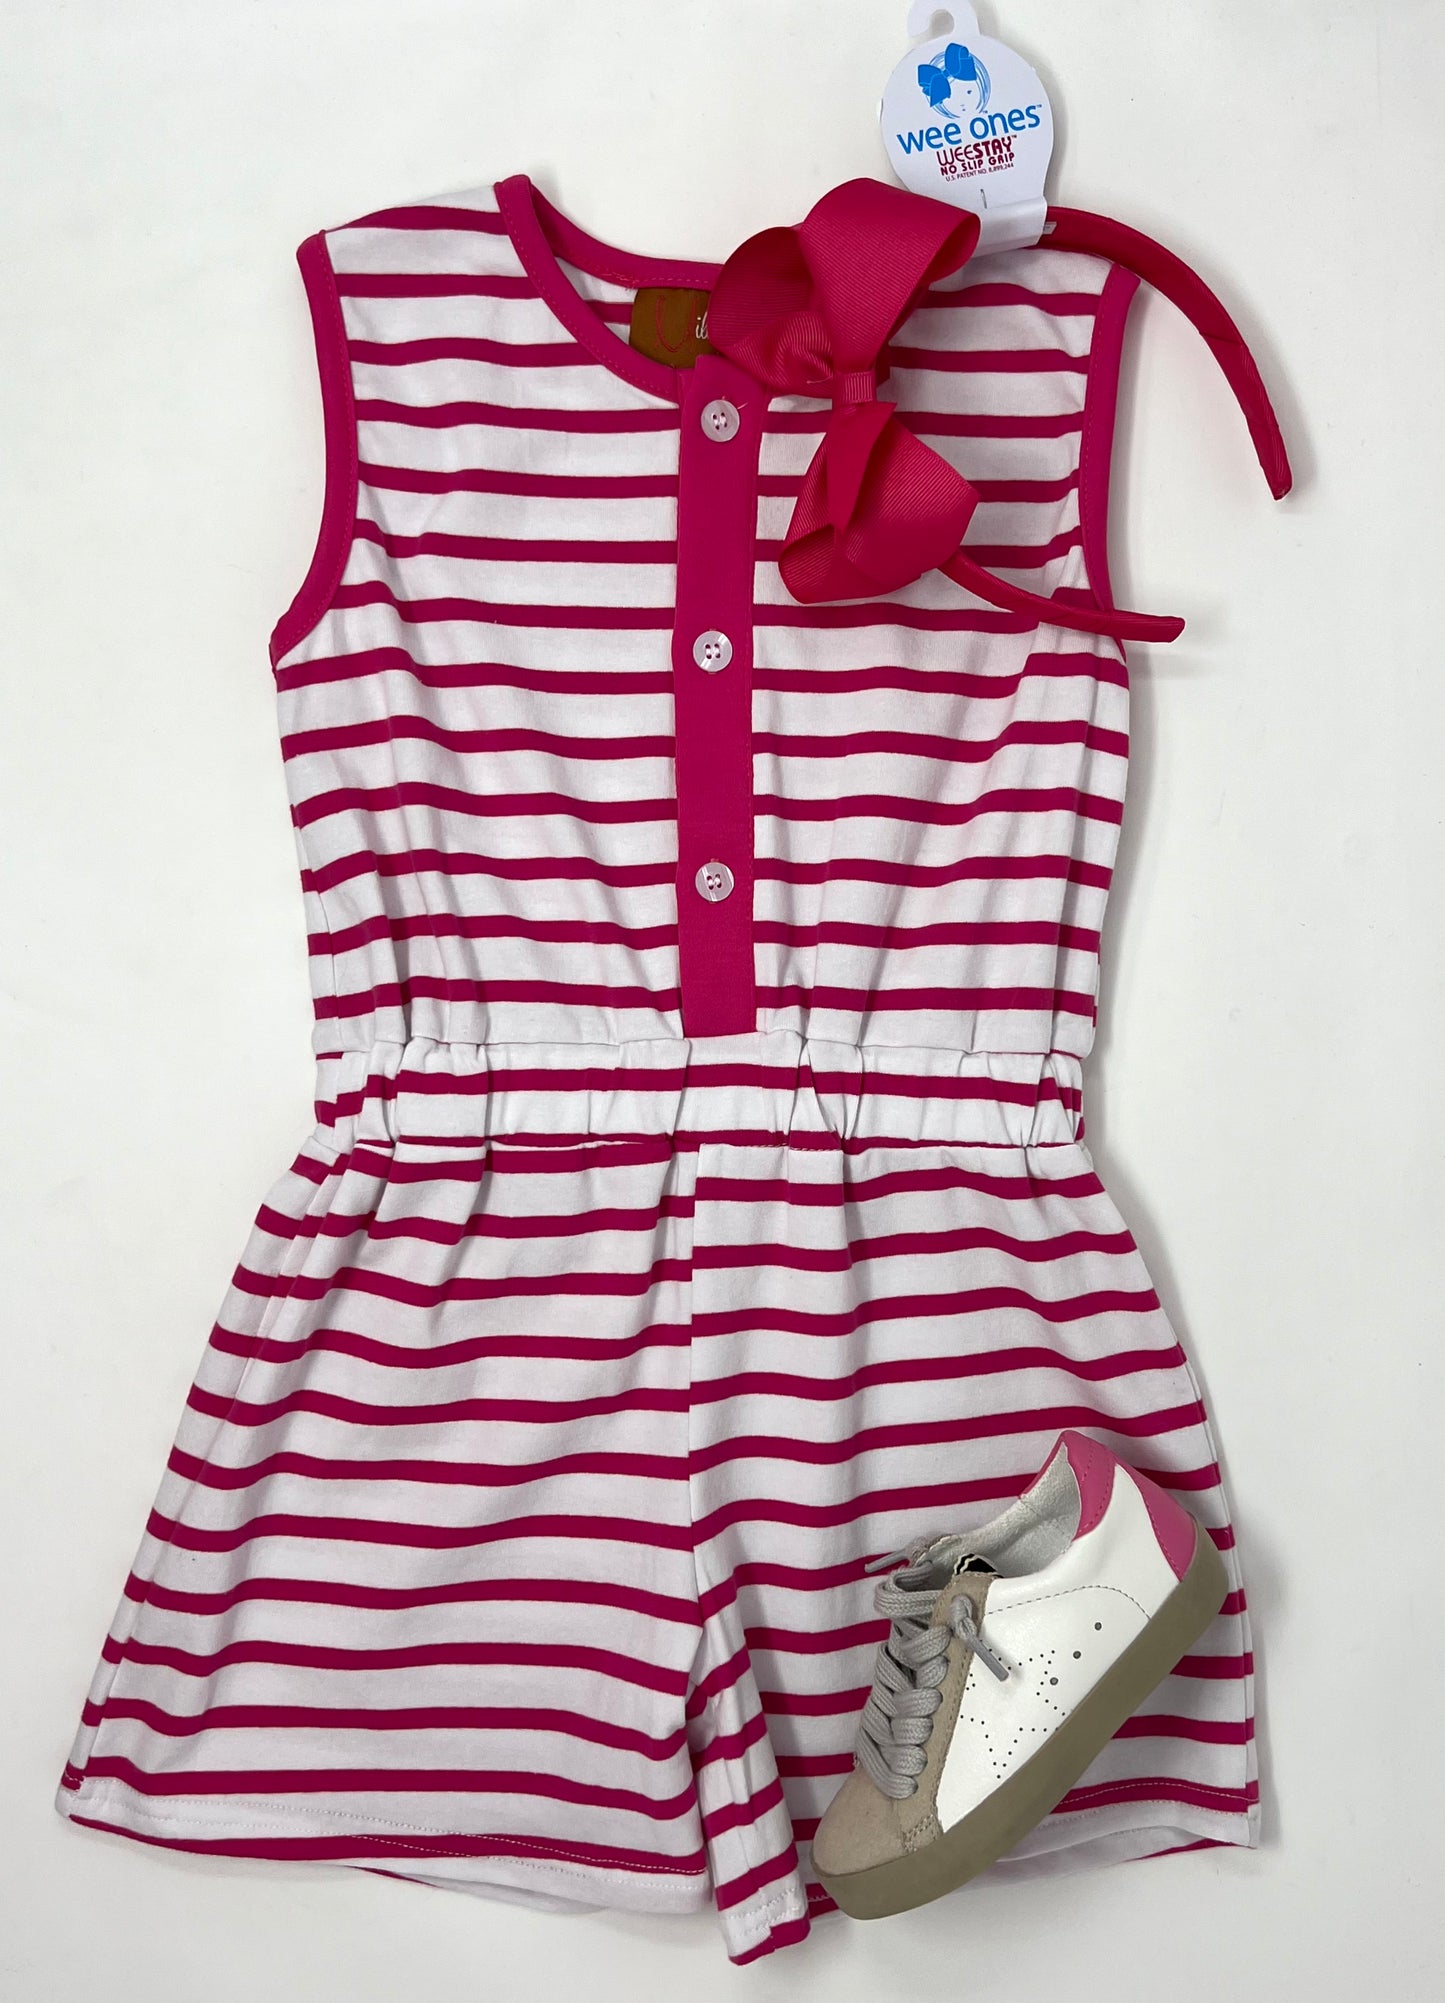 Lily Romper Pink Stripe Girls Bubbles + Rompers Millie Jay   